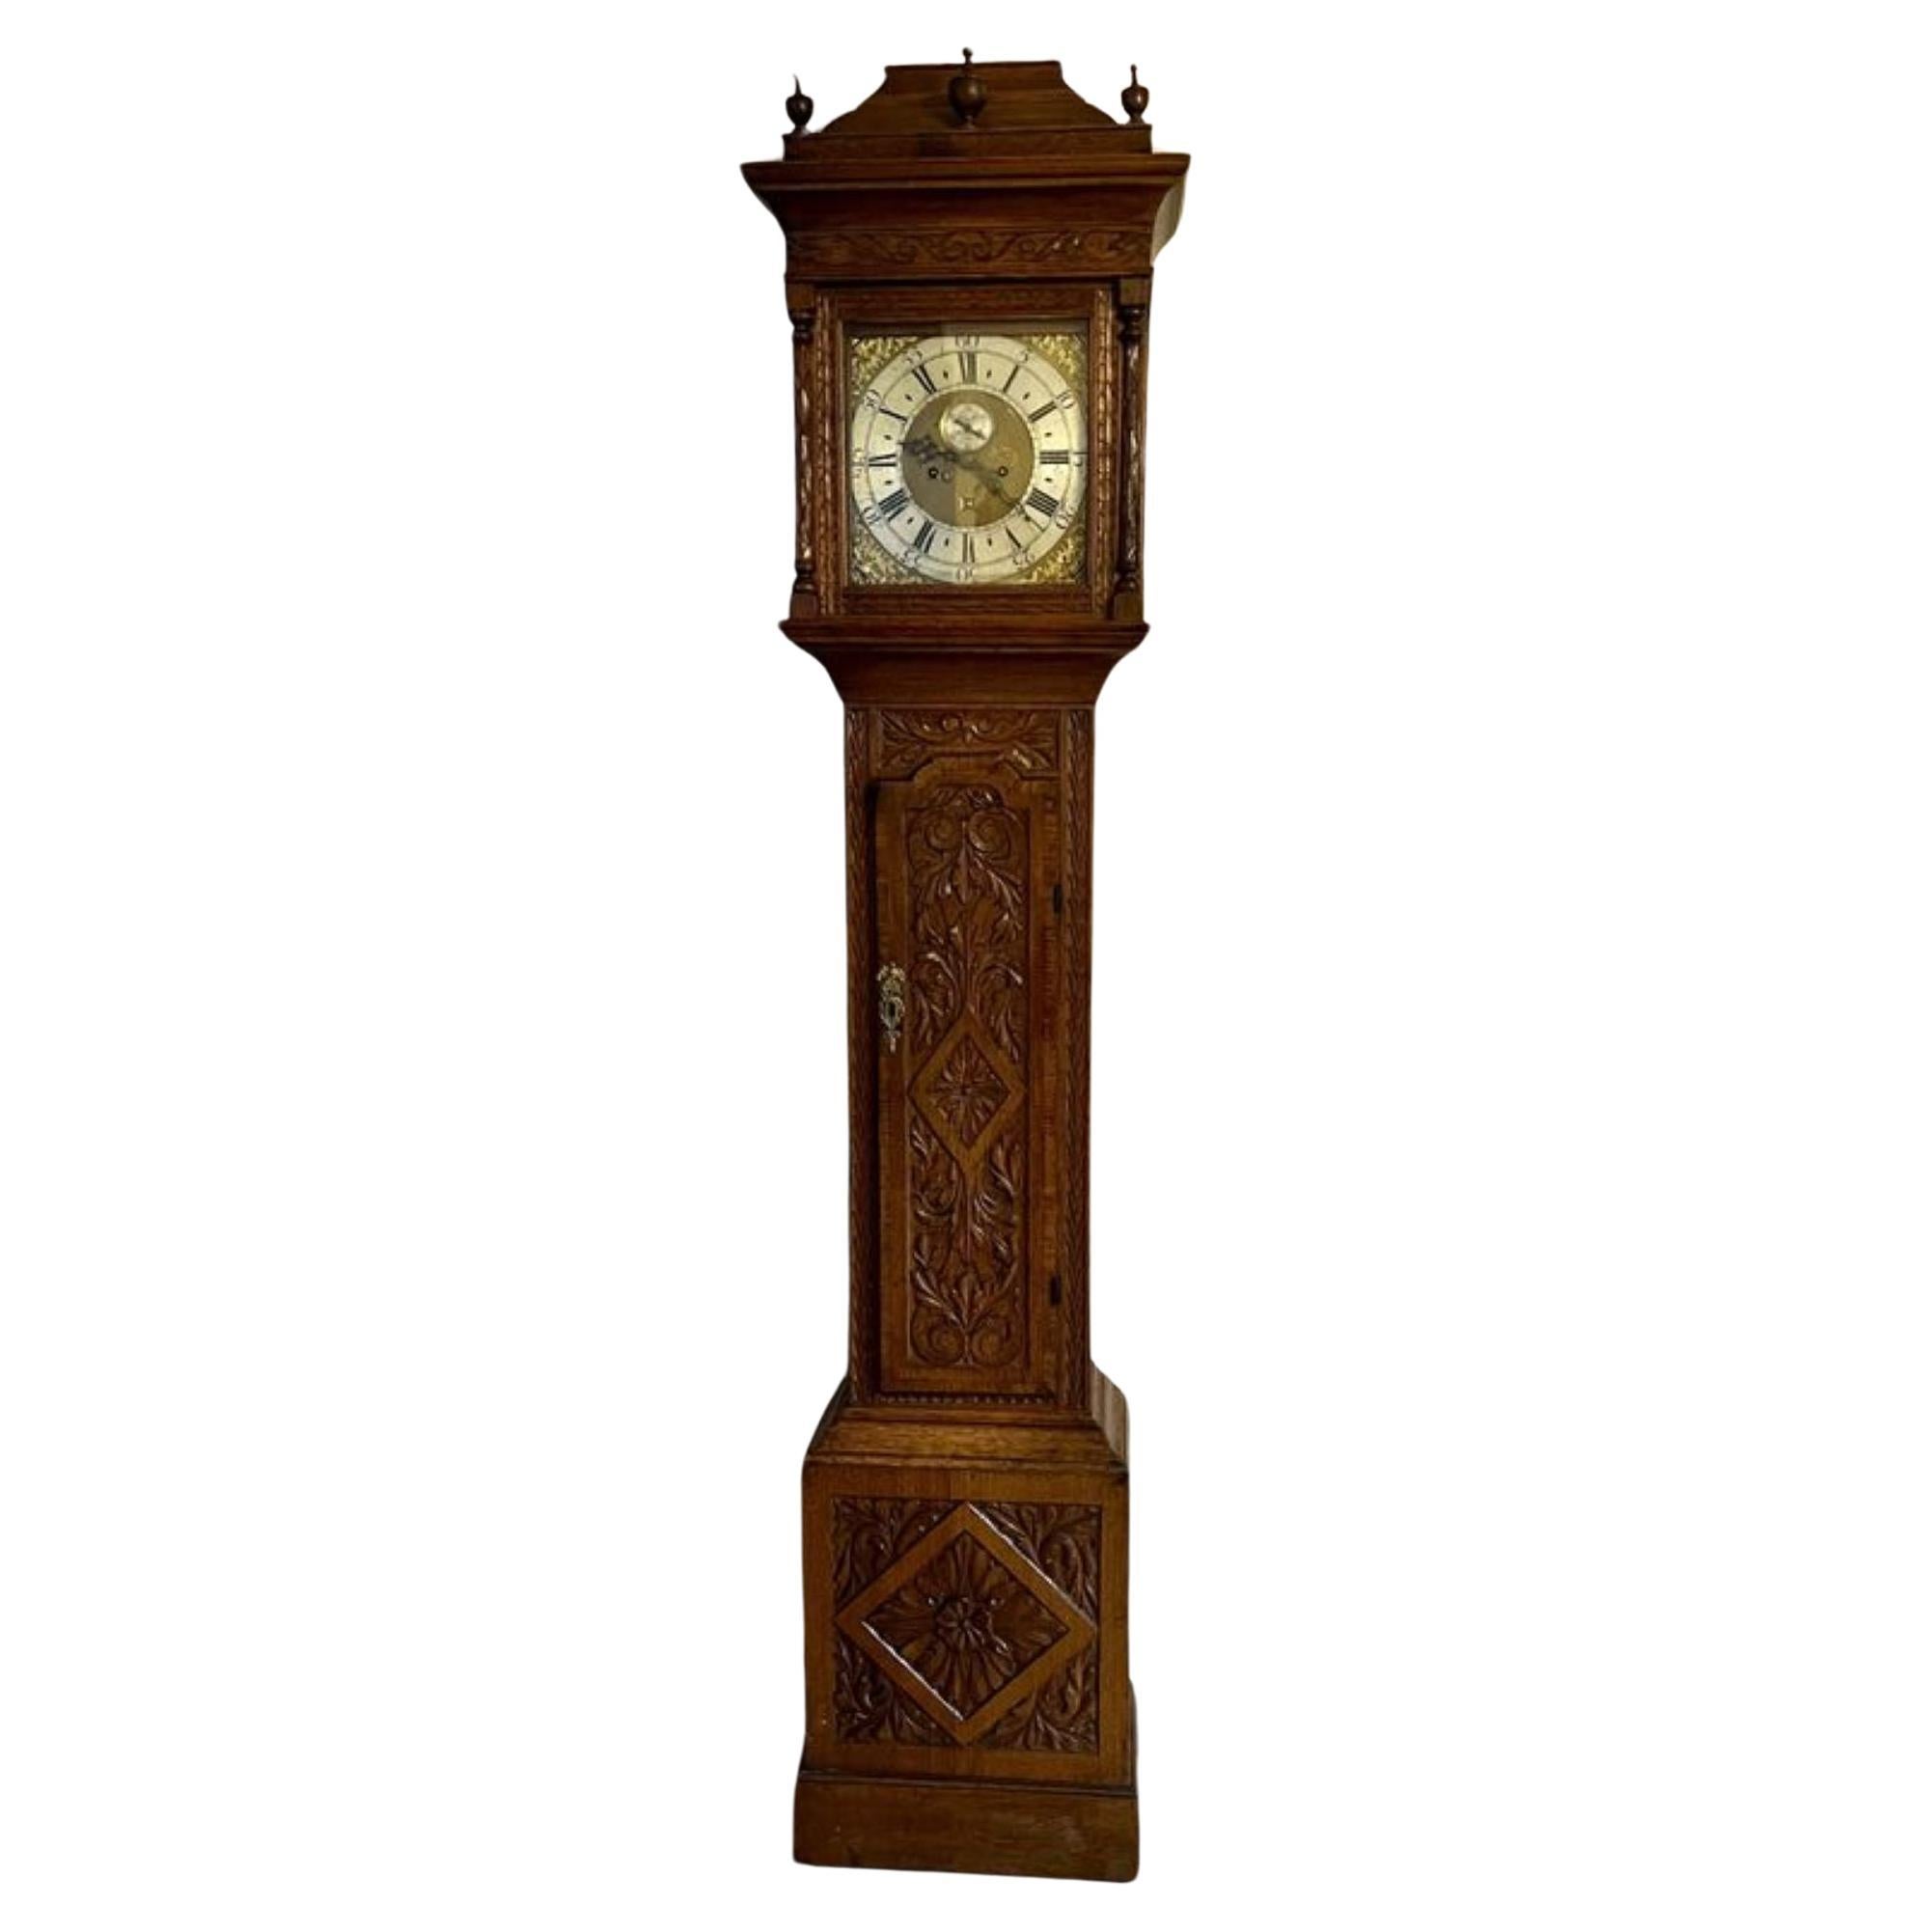 Outstanding quality 18th century carved oak long case clock